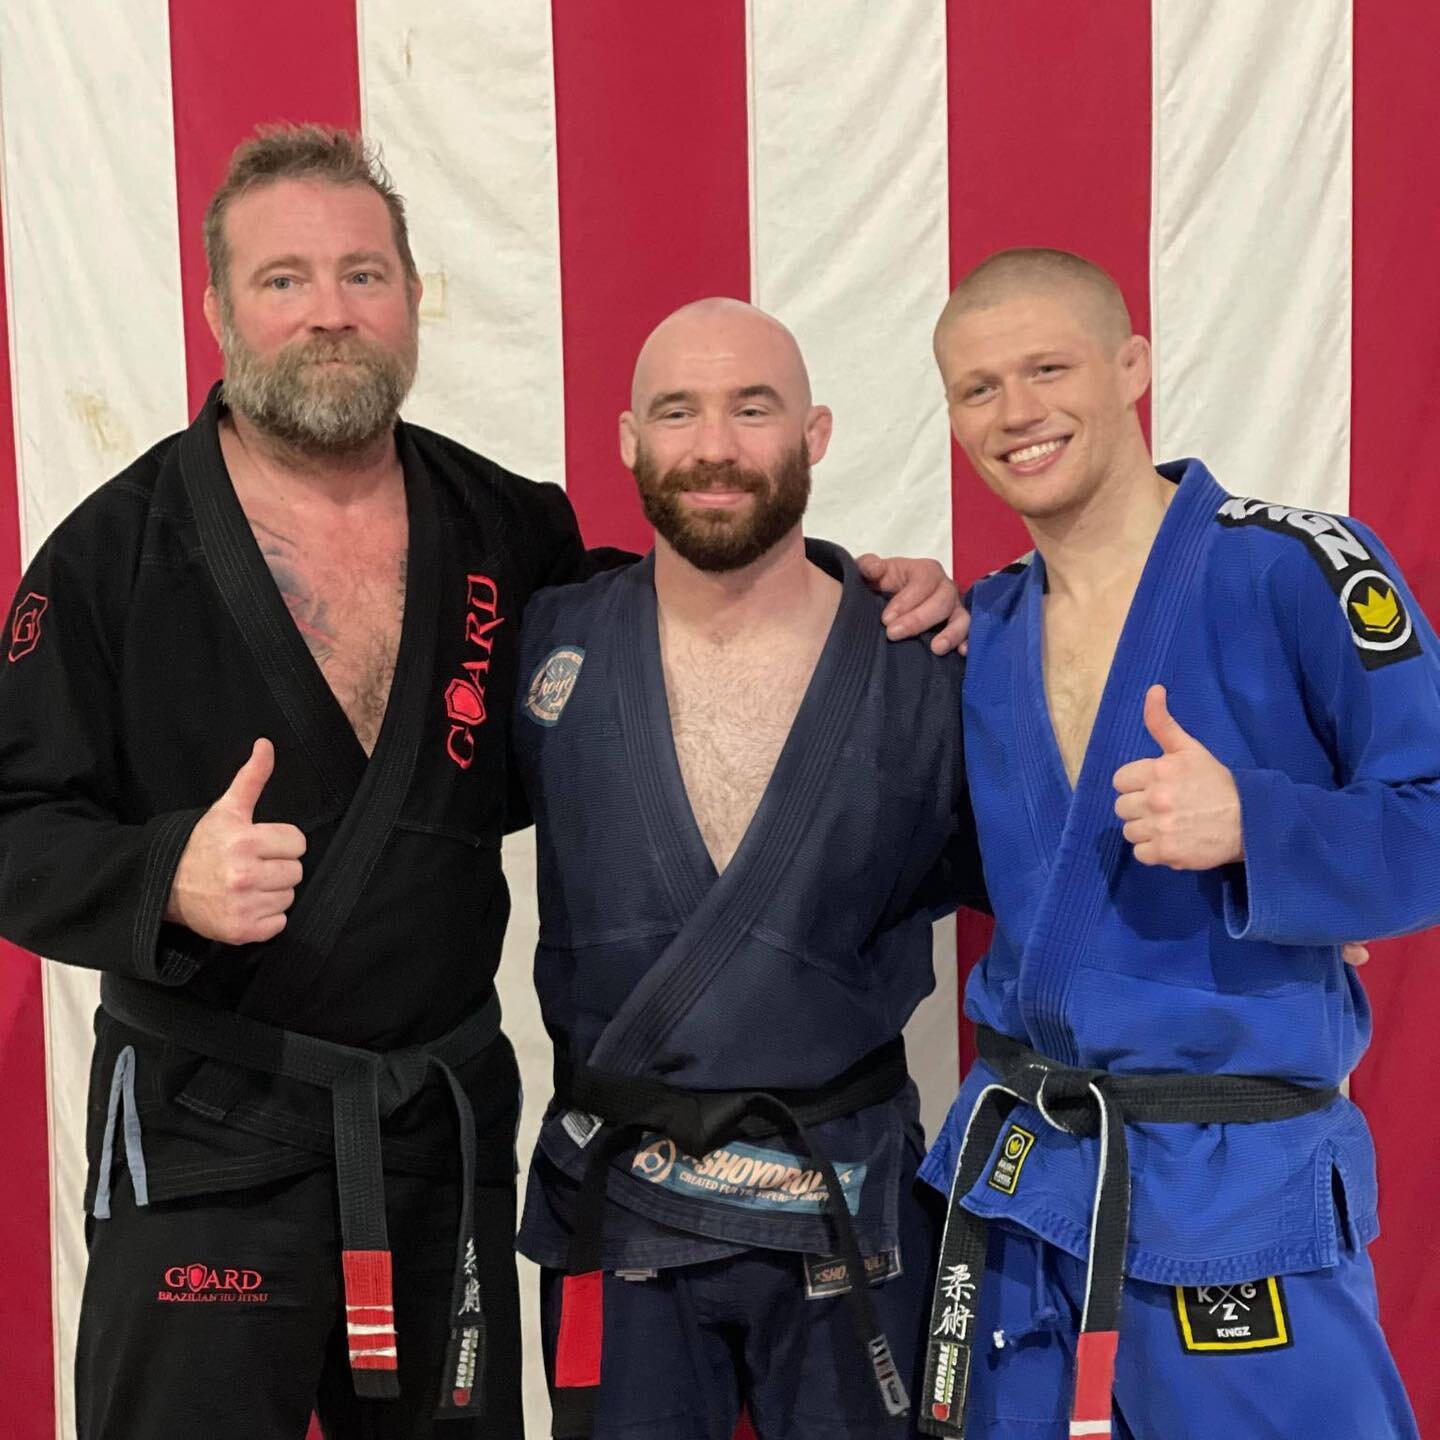 Congratulations to Coach Mike @mkastroba on his promotion to BJJ Black Belt!